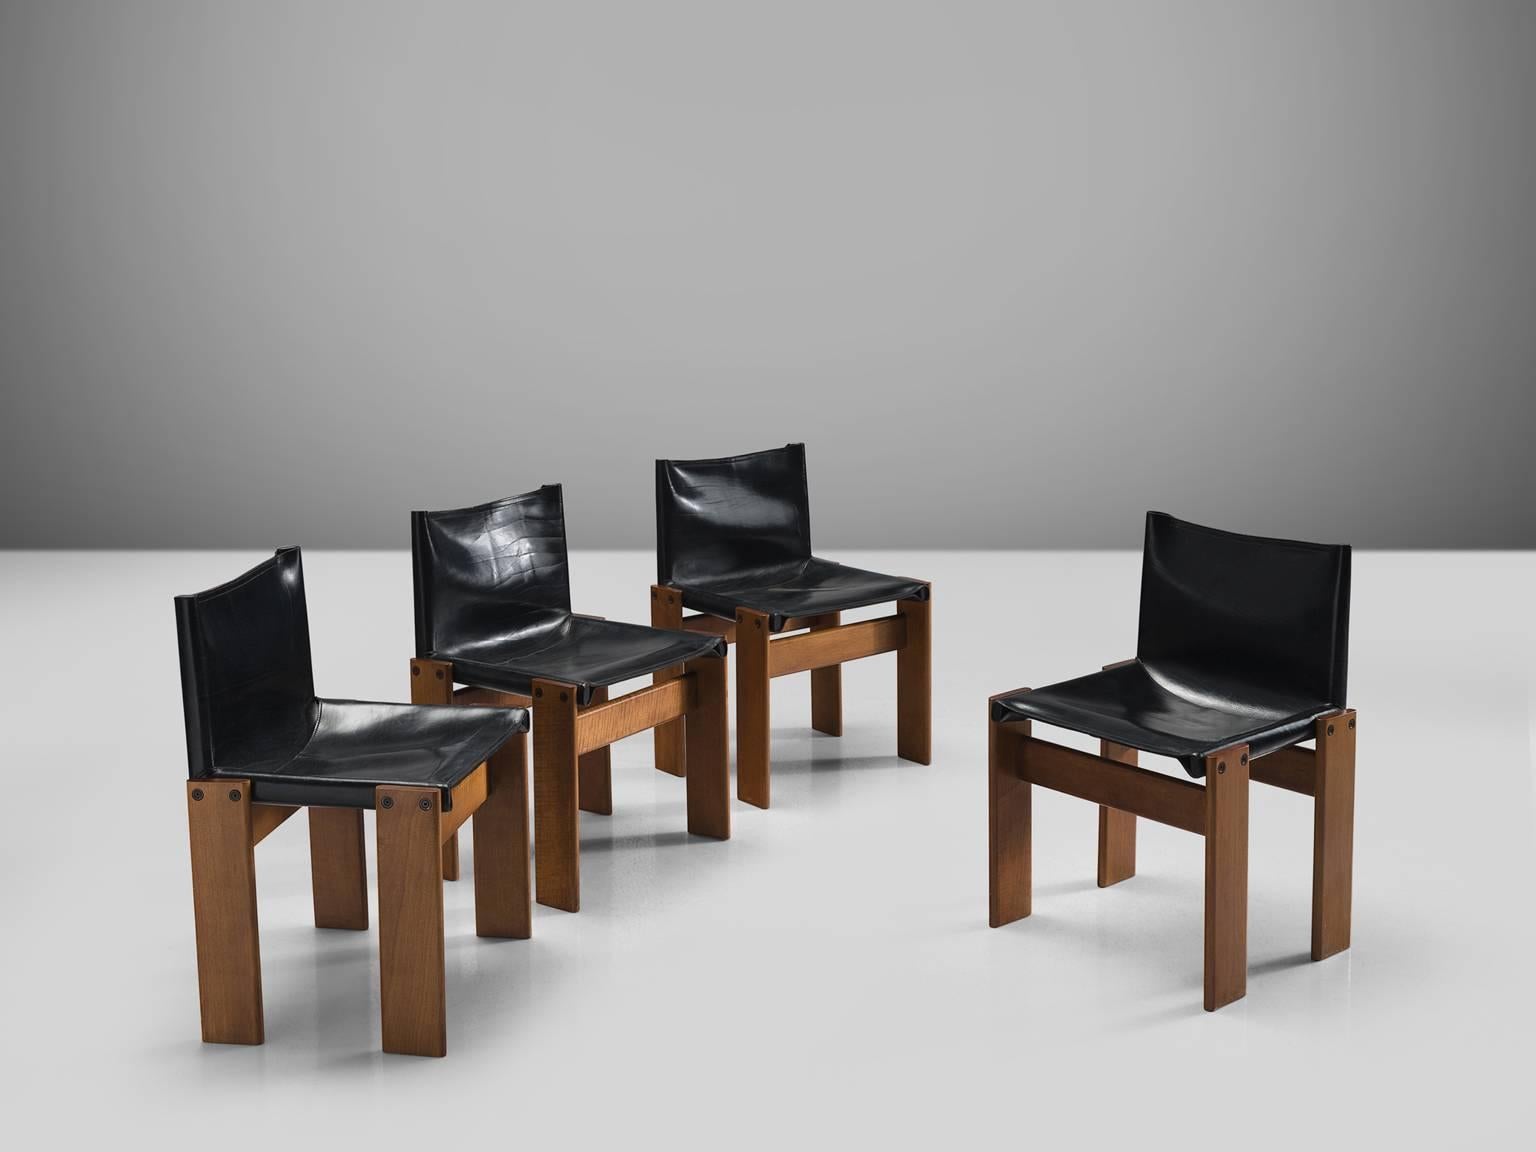 Italian Afra & Tobia Scarpa 'Monk' Chairs in Black Leather